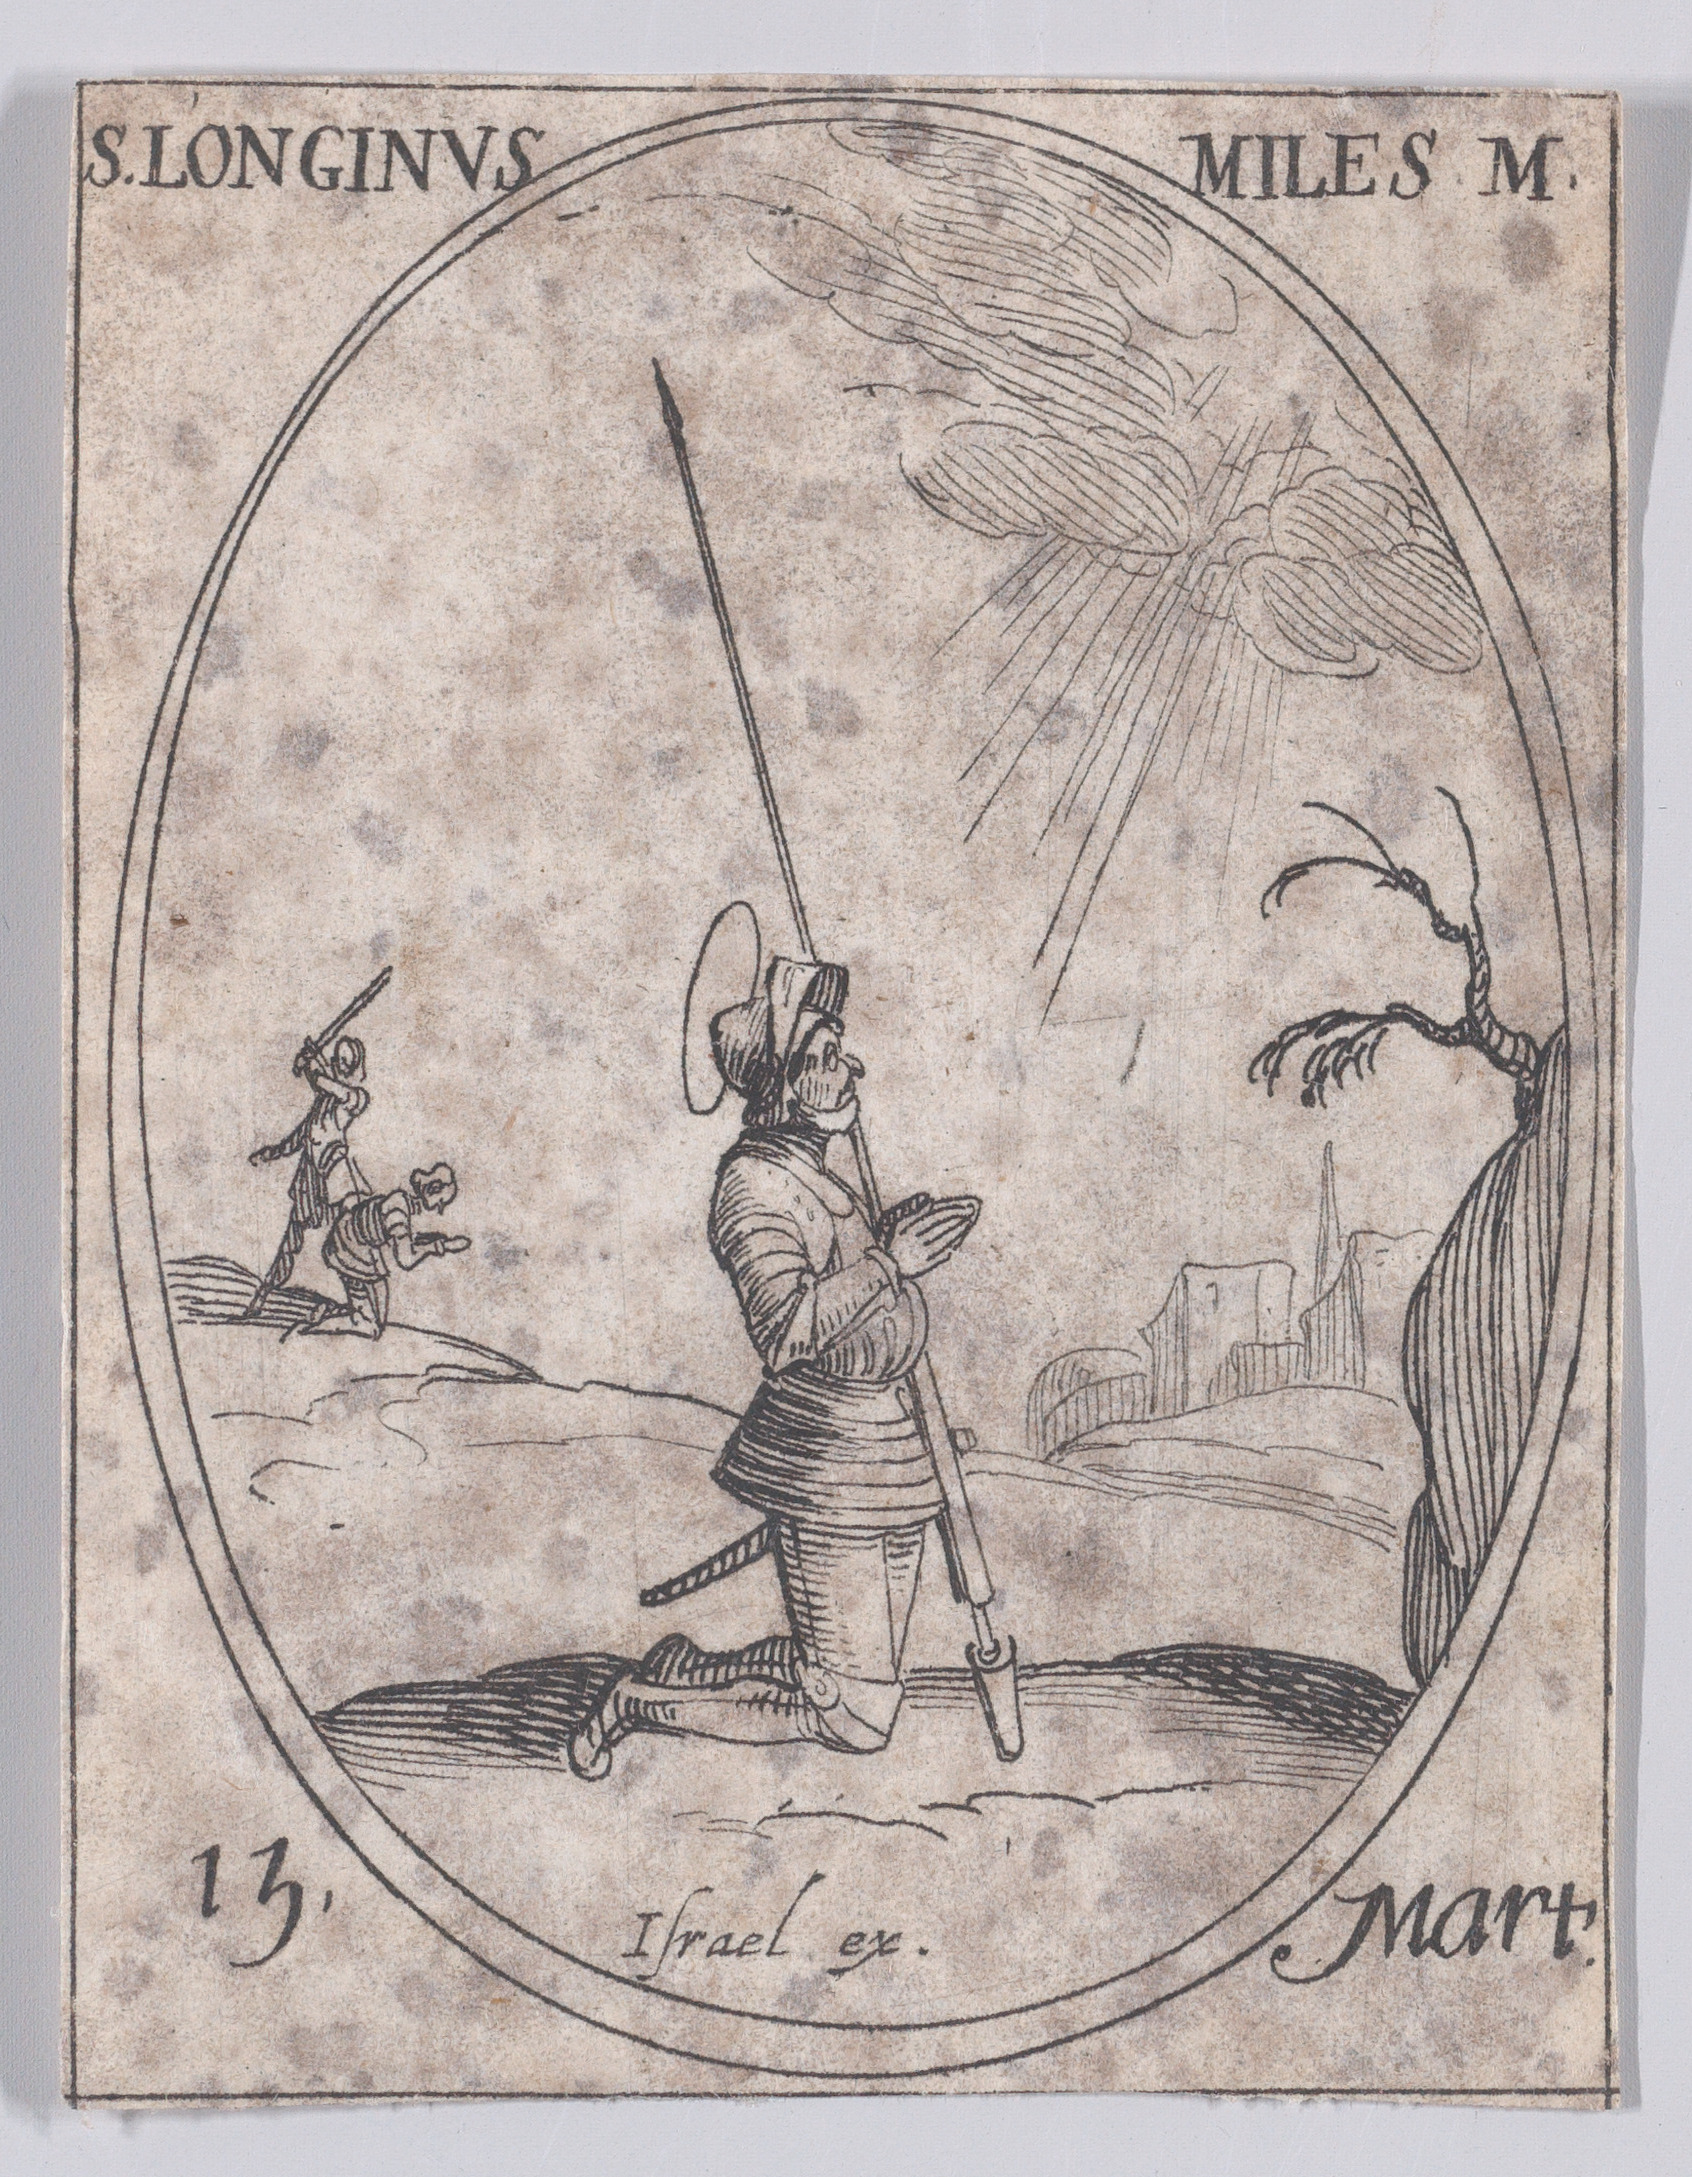 S. Longin, soldat (St. Longinus, Soldier), March 15th, from Les Images De Tous Les Saincts et Saintes de L'Année (Images of All of the Saints and Religious Events of the Year), Jacques Callot (French, Nancy 1592–1635 Nancy), Etching; second state of two (Lieure)